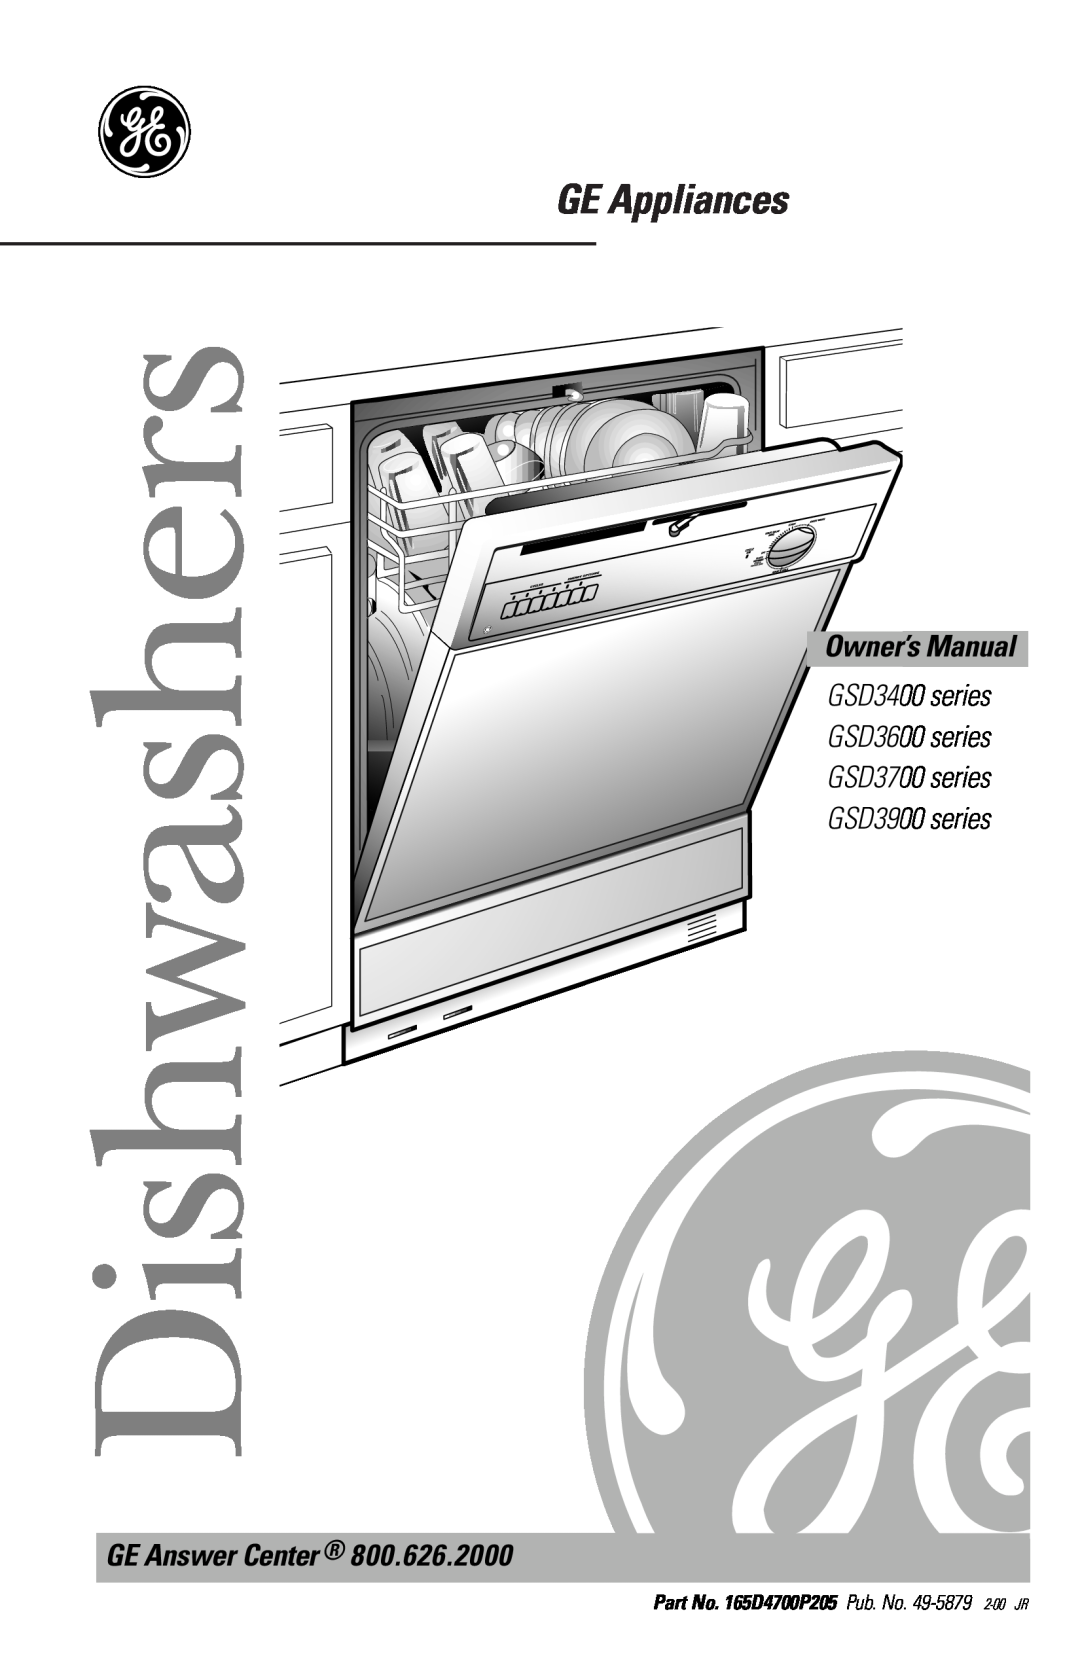 GE GSD3400, GSD3600, GSD3700, GSD3900 owner manual GE Appliances, GE Answer Center, Dishwashers 